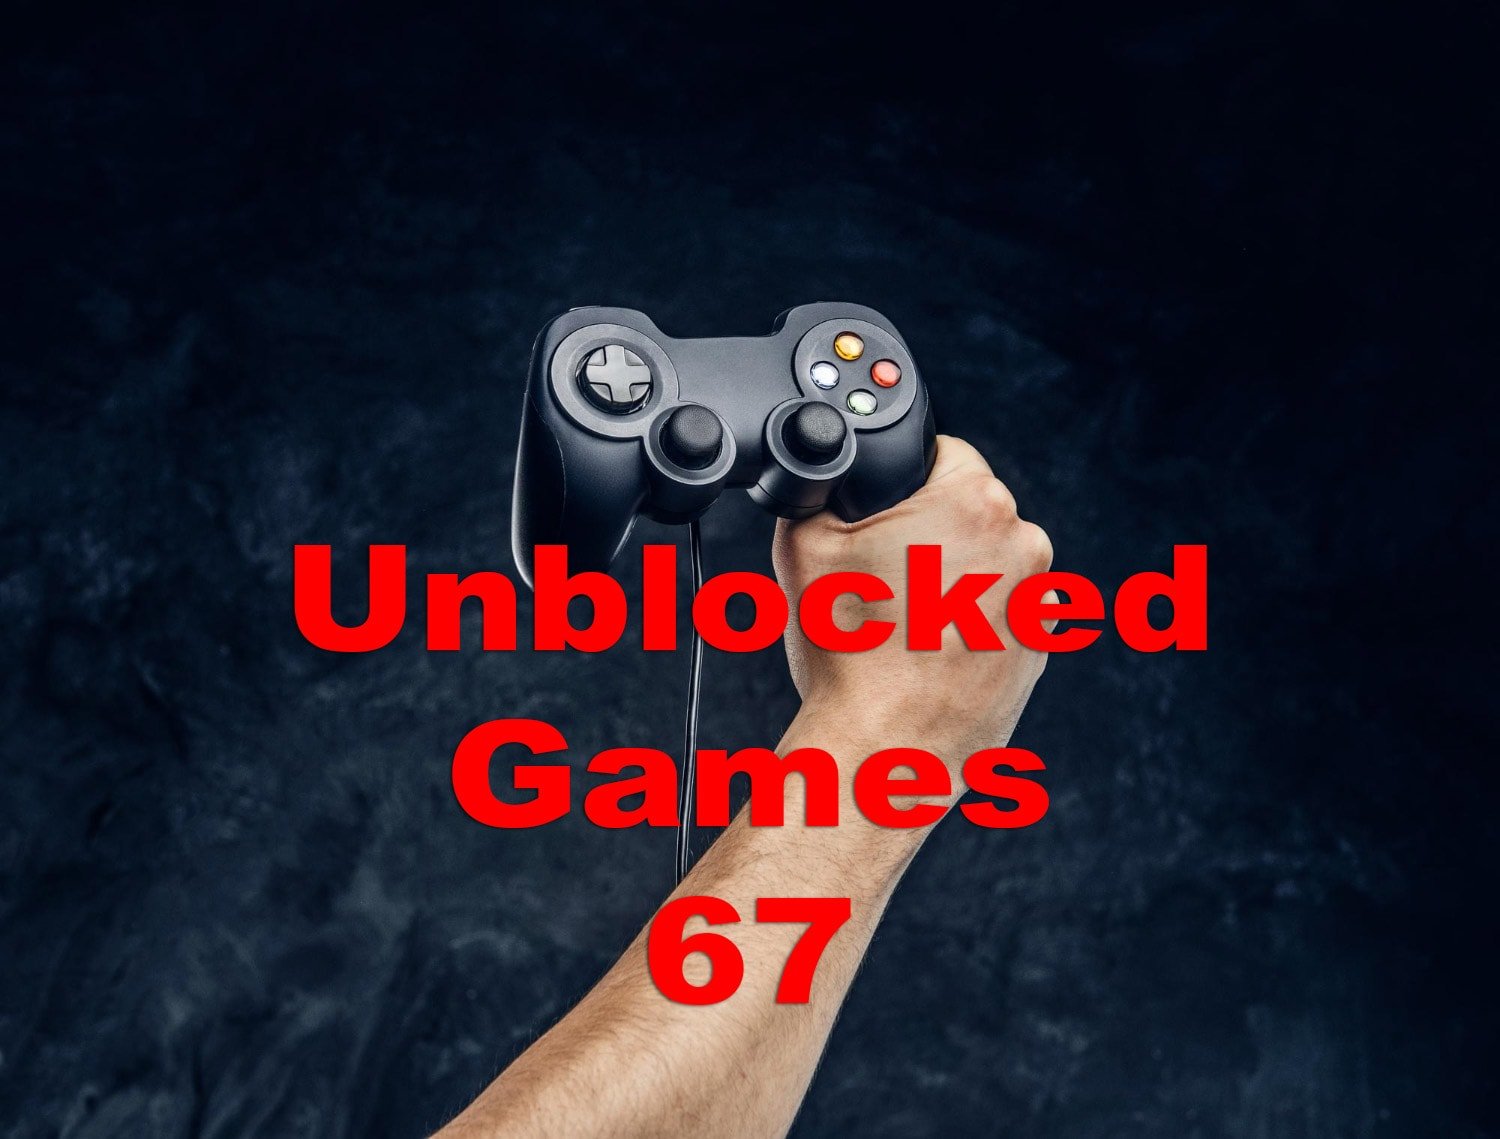 Play Unblocked Games 67 In Fullscreen Mode (25+ New Games)